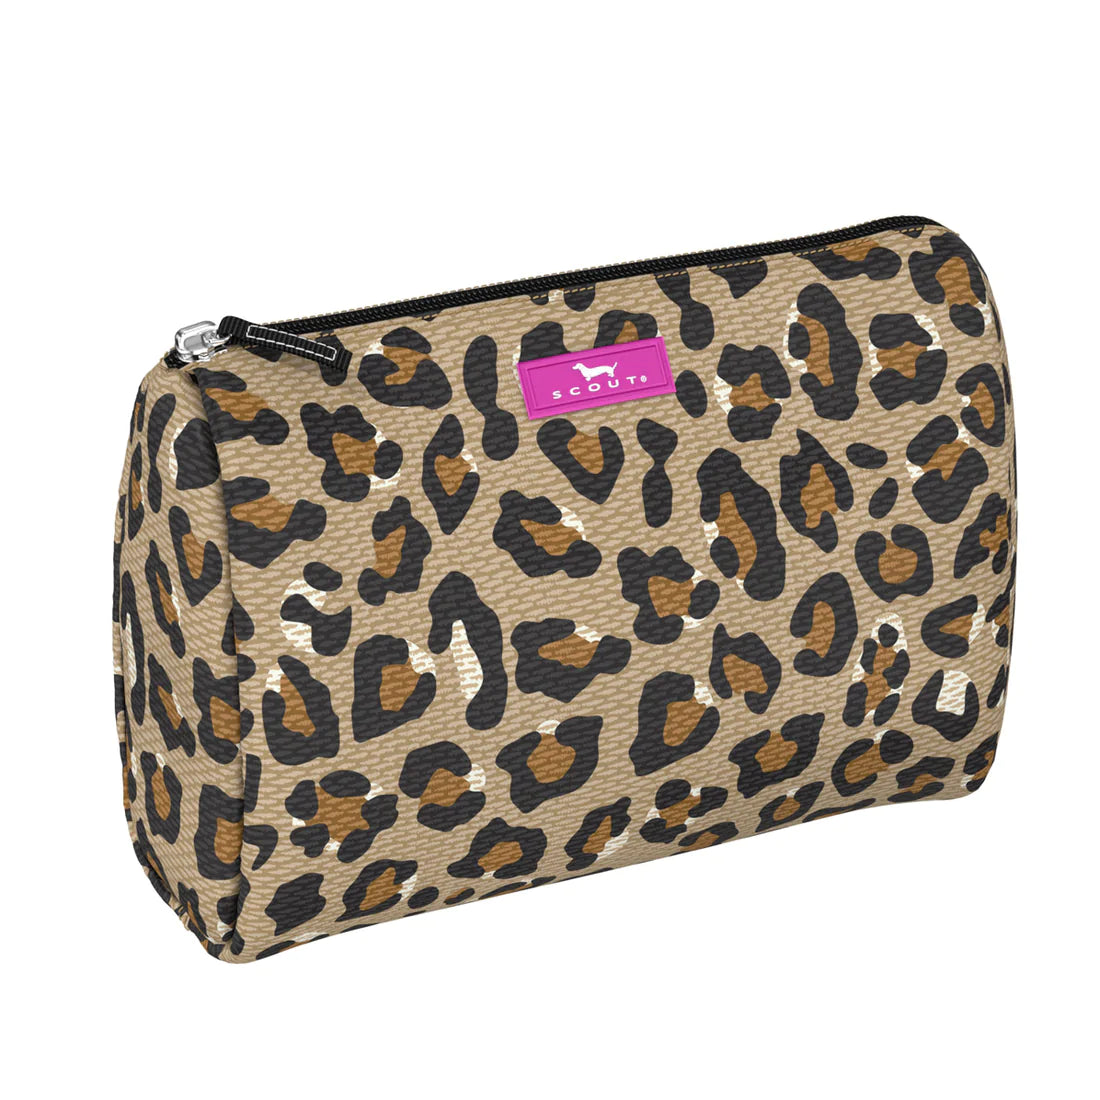 Scout Packin' Heat Makeup Bag - Cindy Clawford